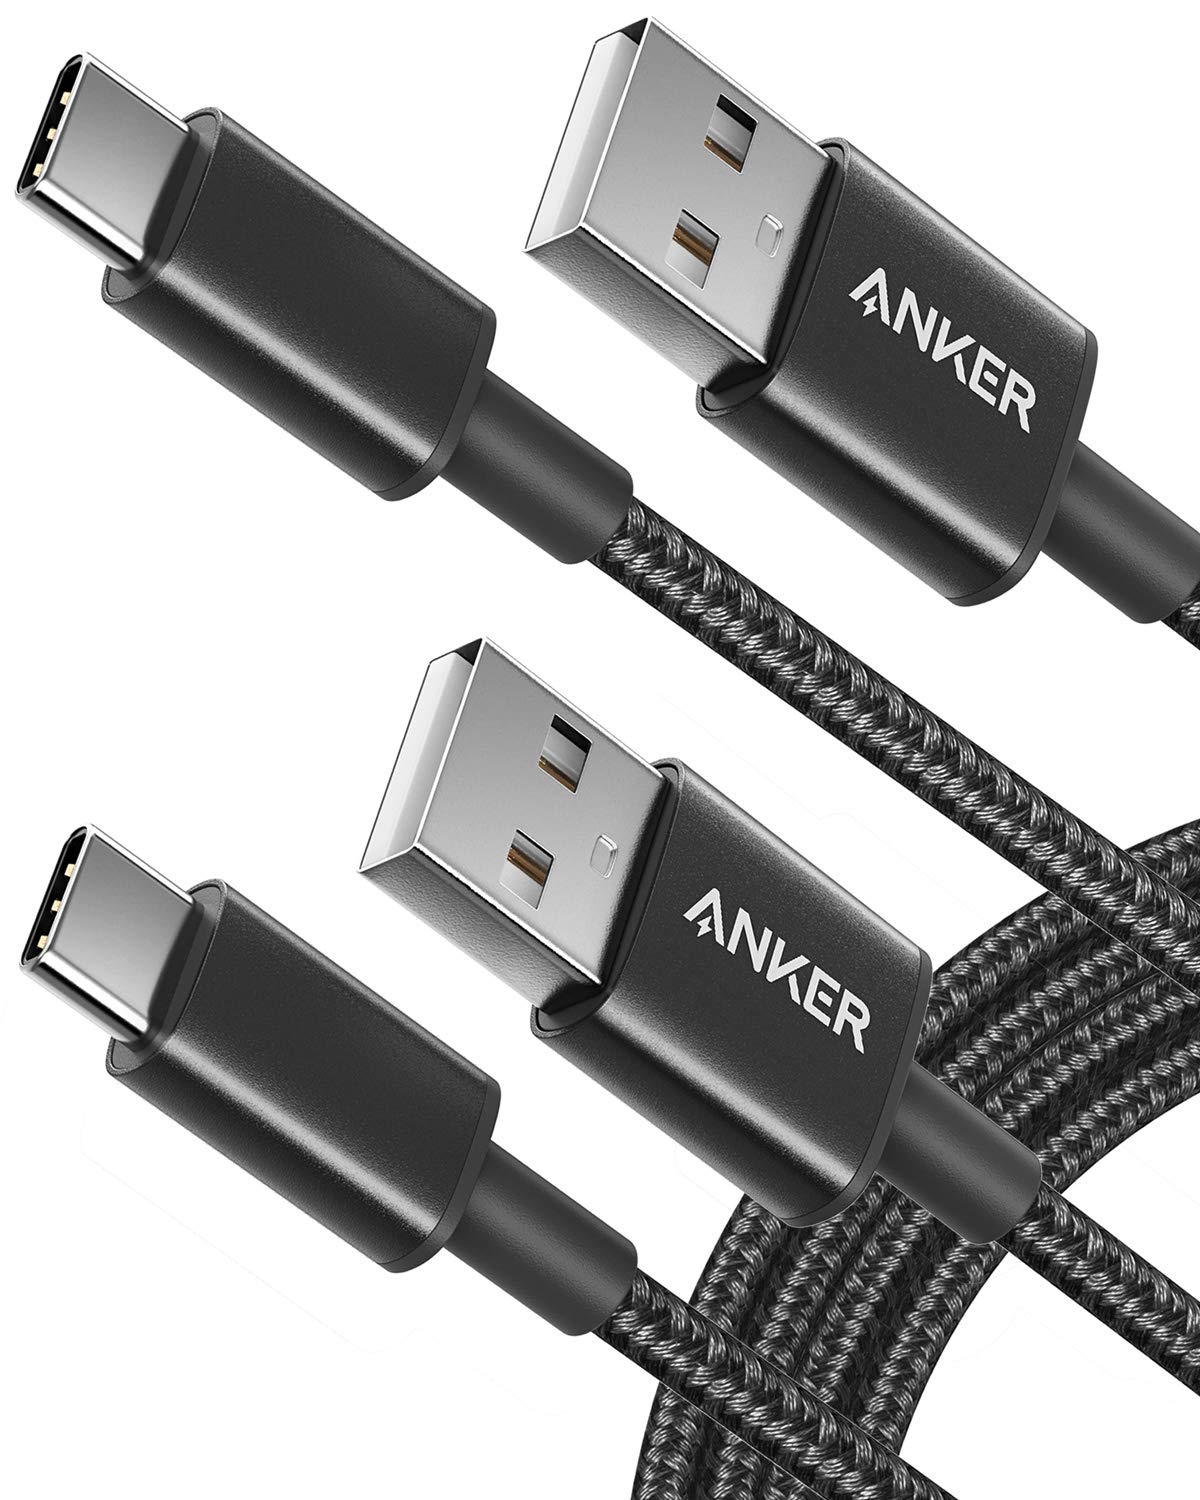 Anker USB A to USB C Cable [2-Pack, 6ft]